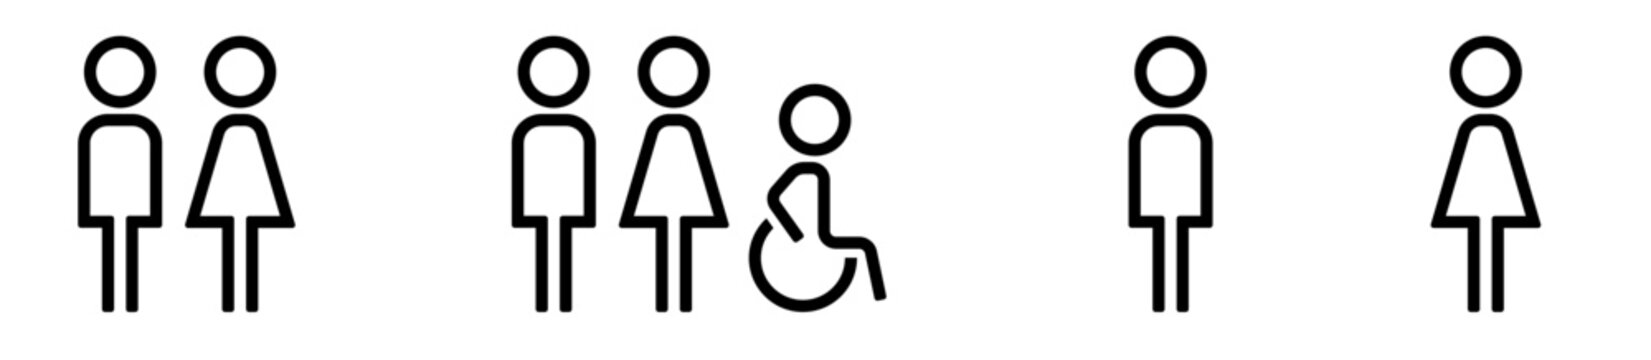 Restroom icons representing men, women and wheelchairs